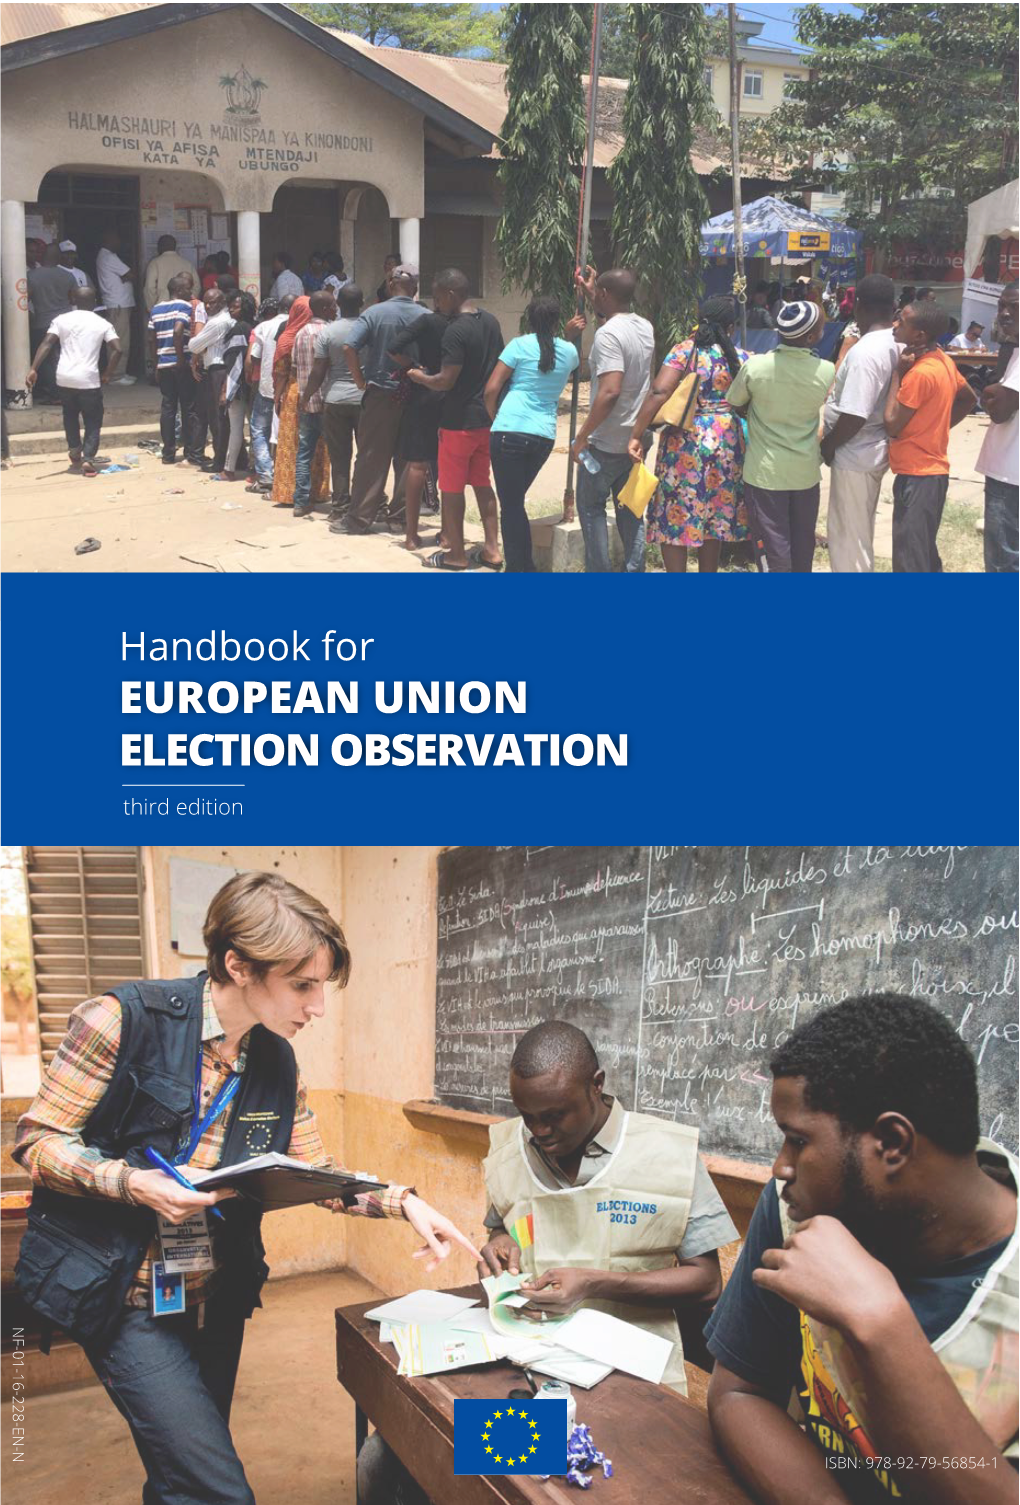 3Rd Edition of the Handbook for EU Election Observation